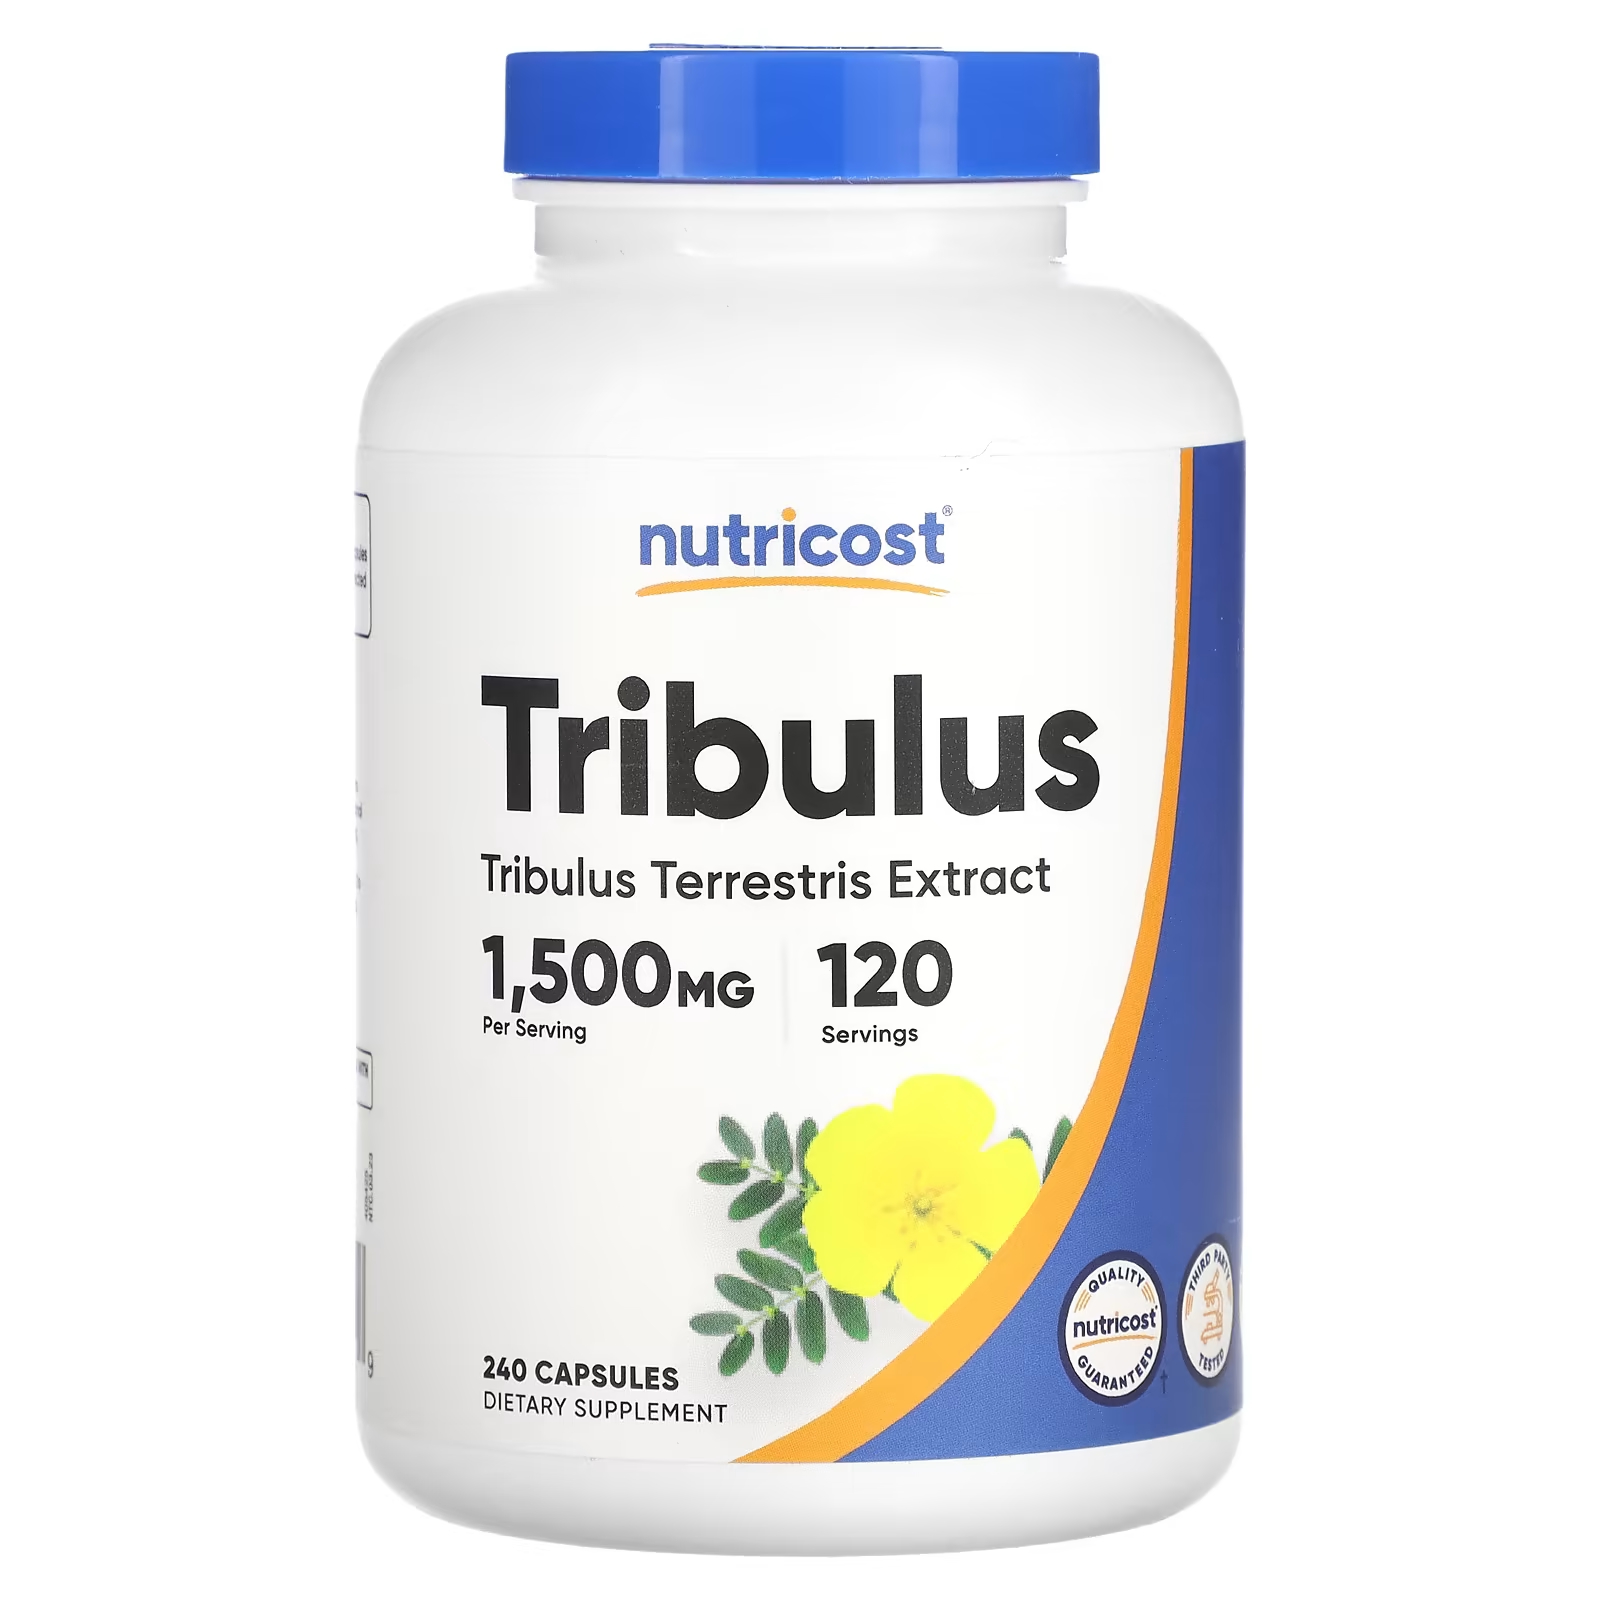 Nutricost Tribulus 1500 мг 240 капсул (750 мг на капсулу) nutricost кордицепс гриб 1100 мг 180 капсул 550 мг на капсулу